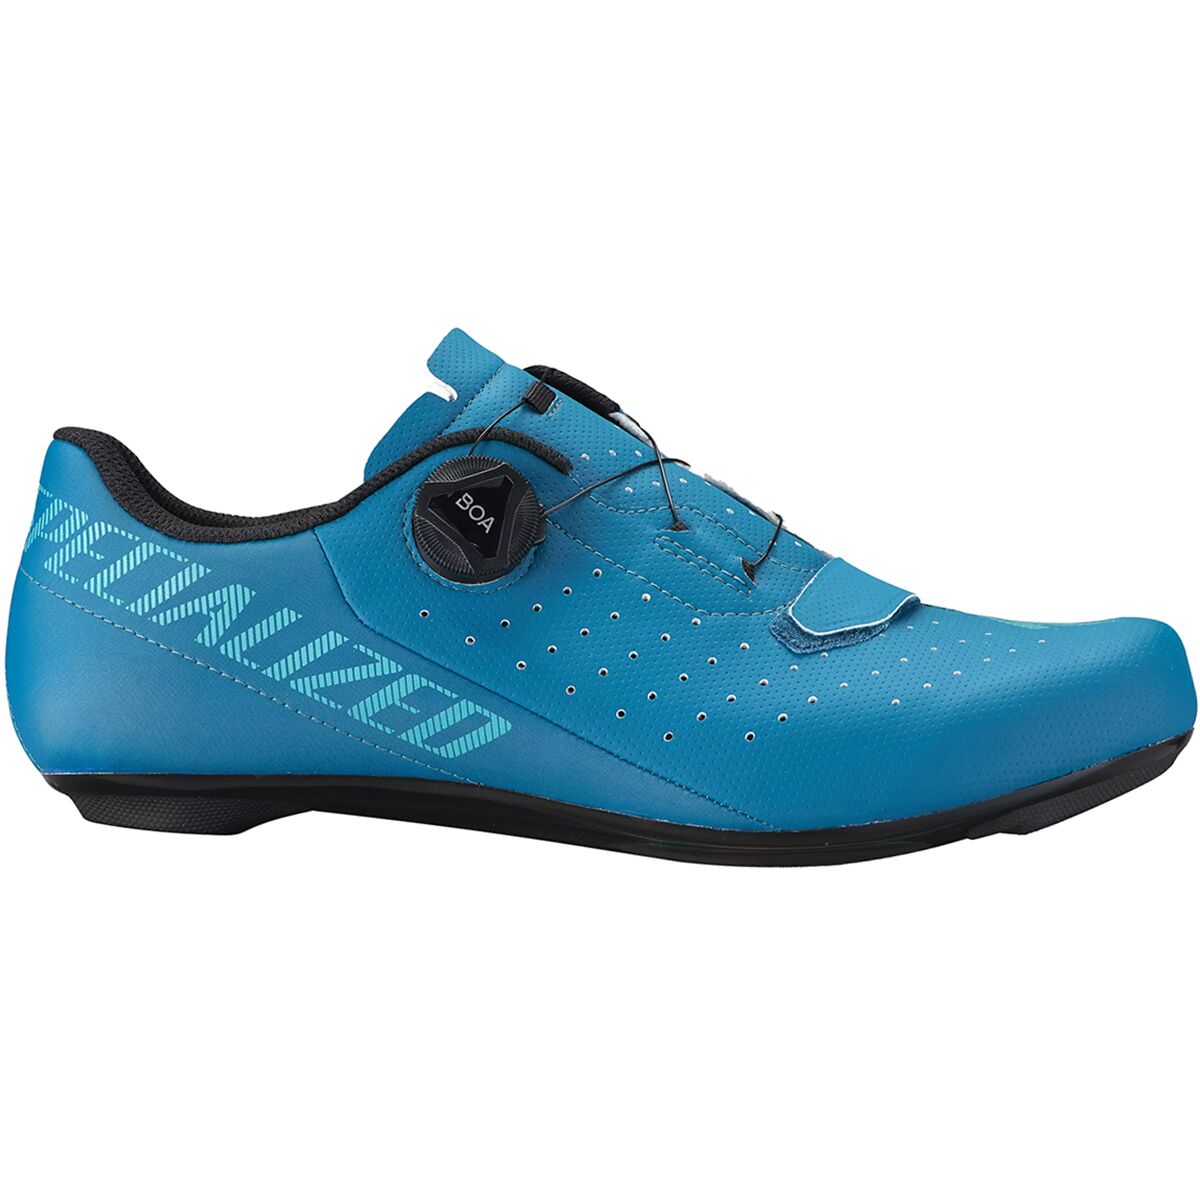 Specialized Torch 1.0 Cycling Shoe Tropical Teal/Lagoon Blue, 45.0